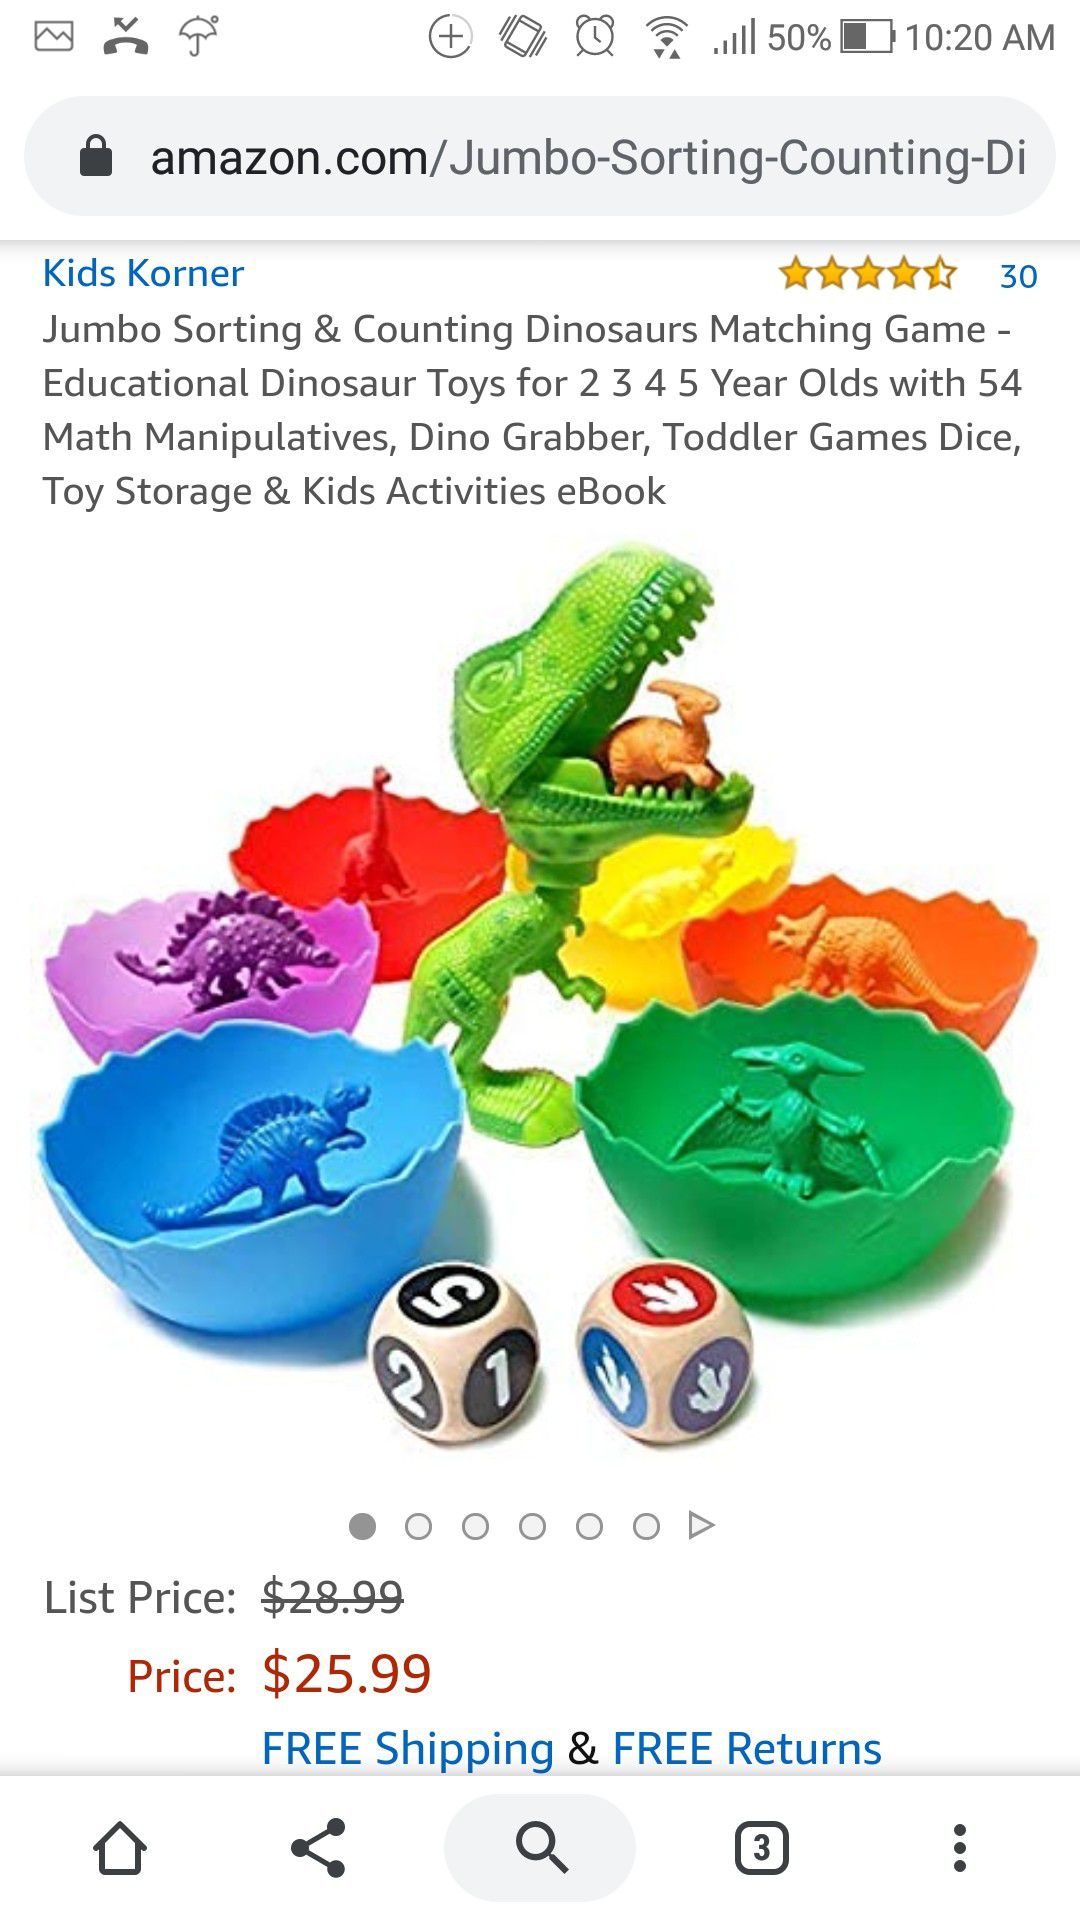 Counting Dinosaurs Matching Game